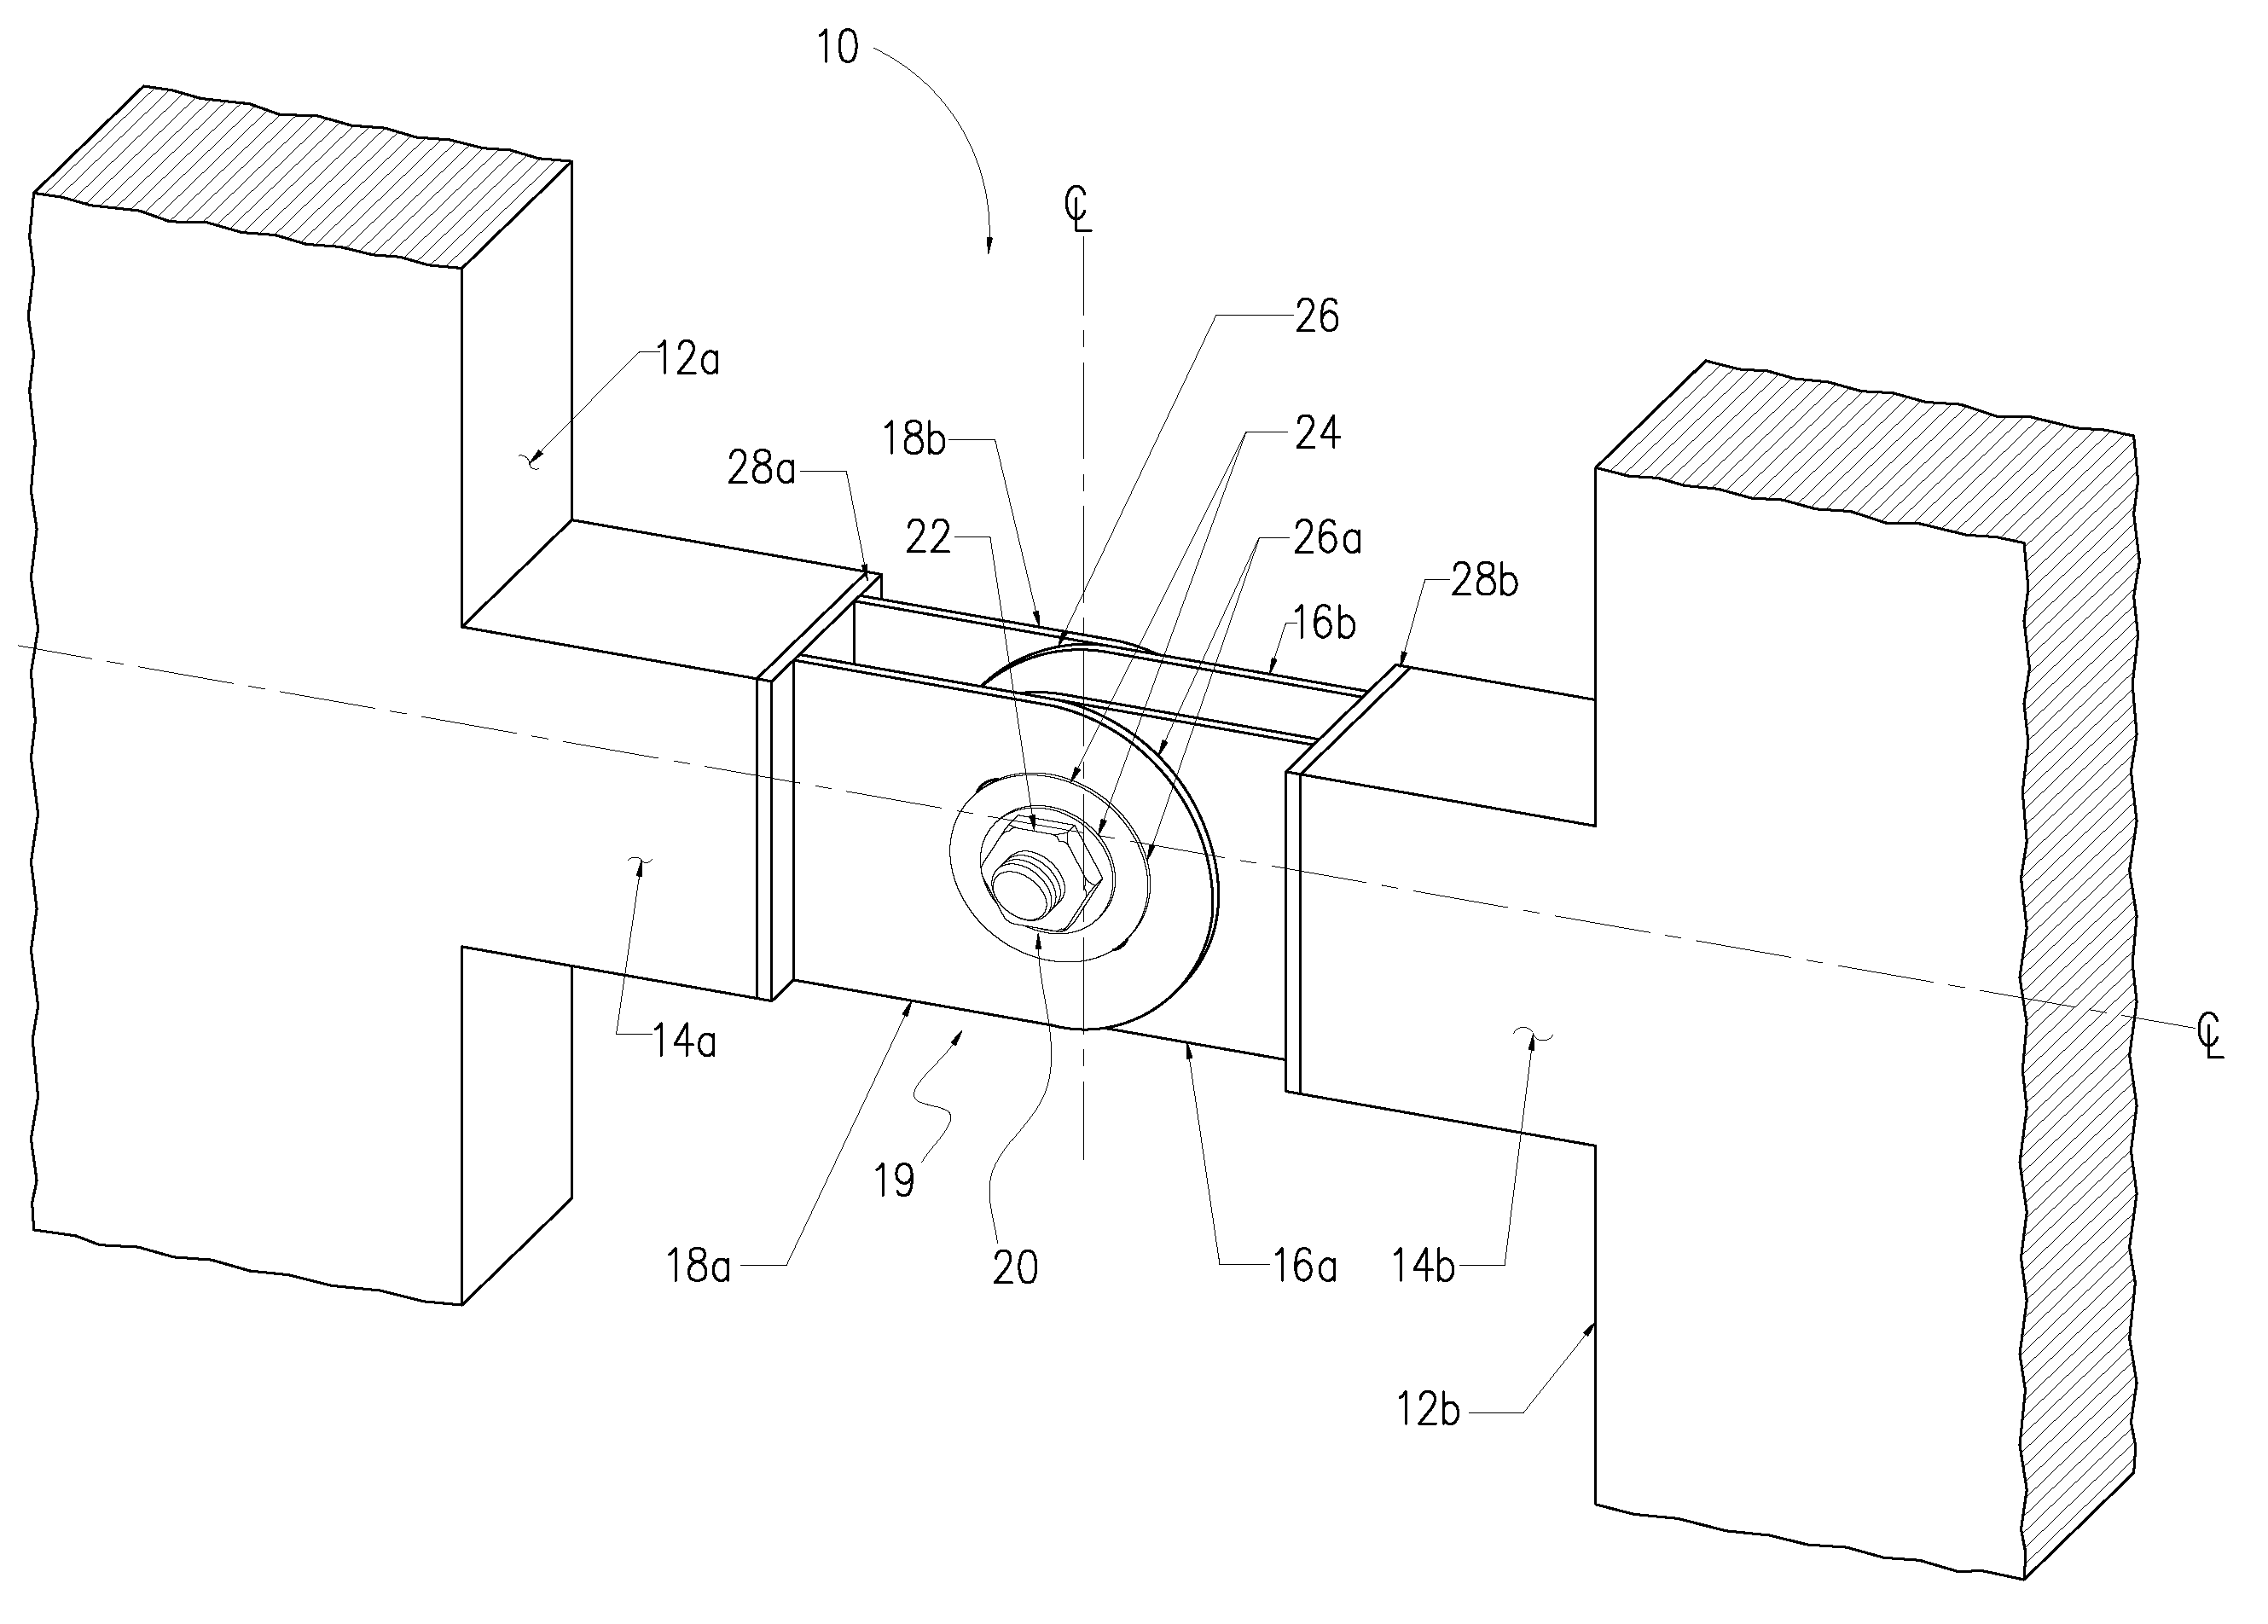 Seismic structural device